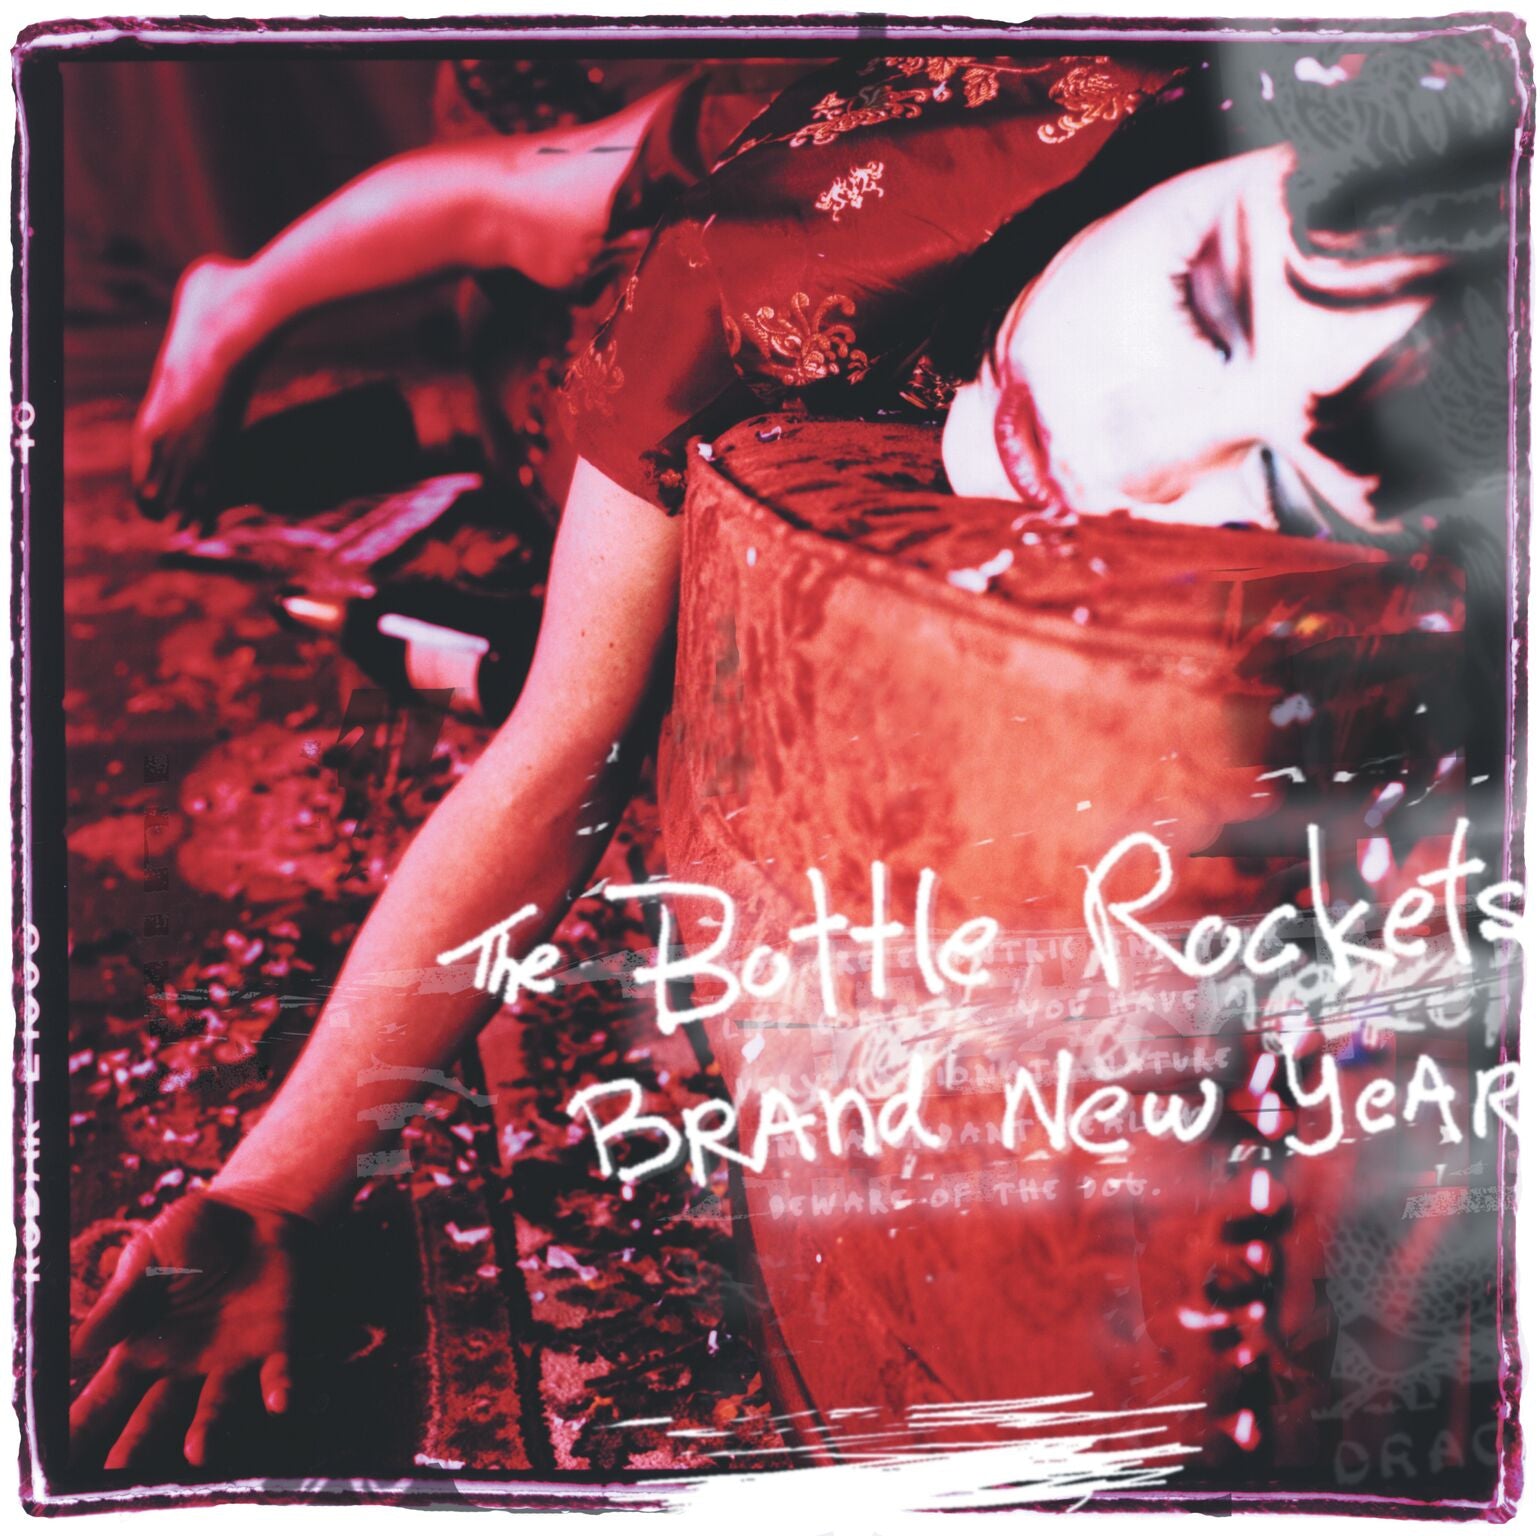 The Bottle Rockets - Brand New Year [CD]